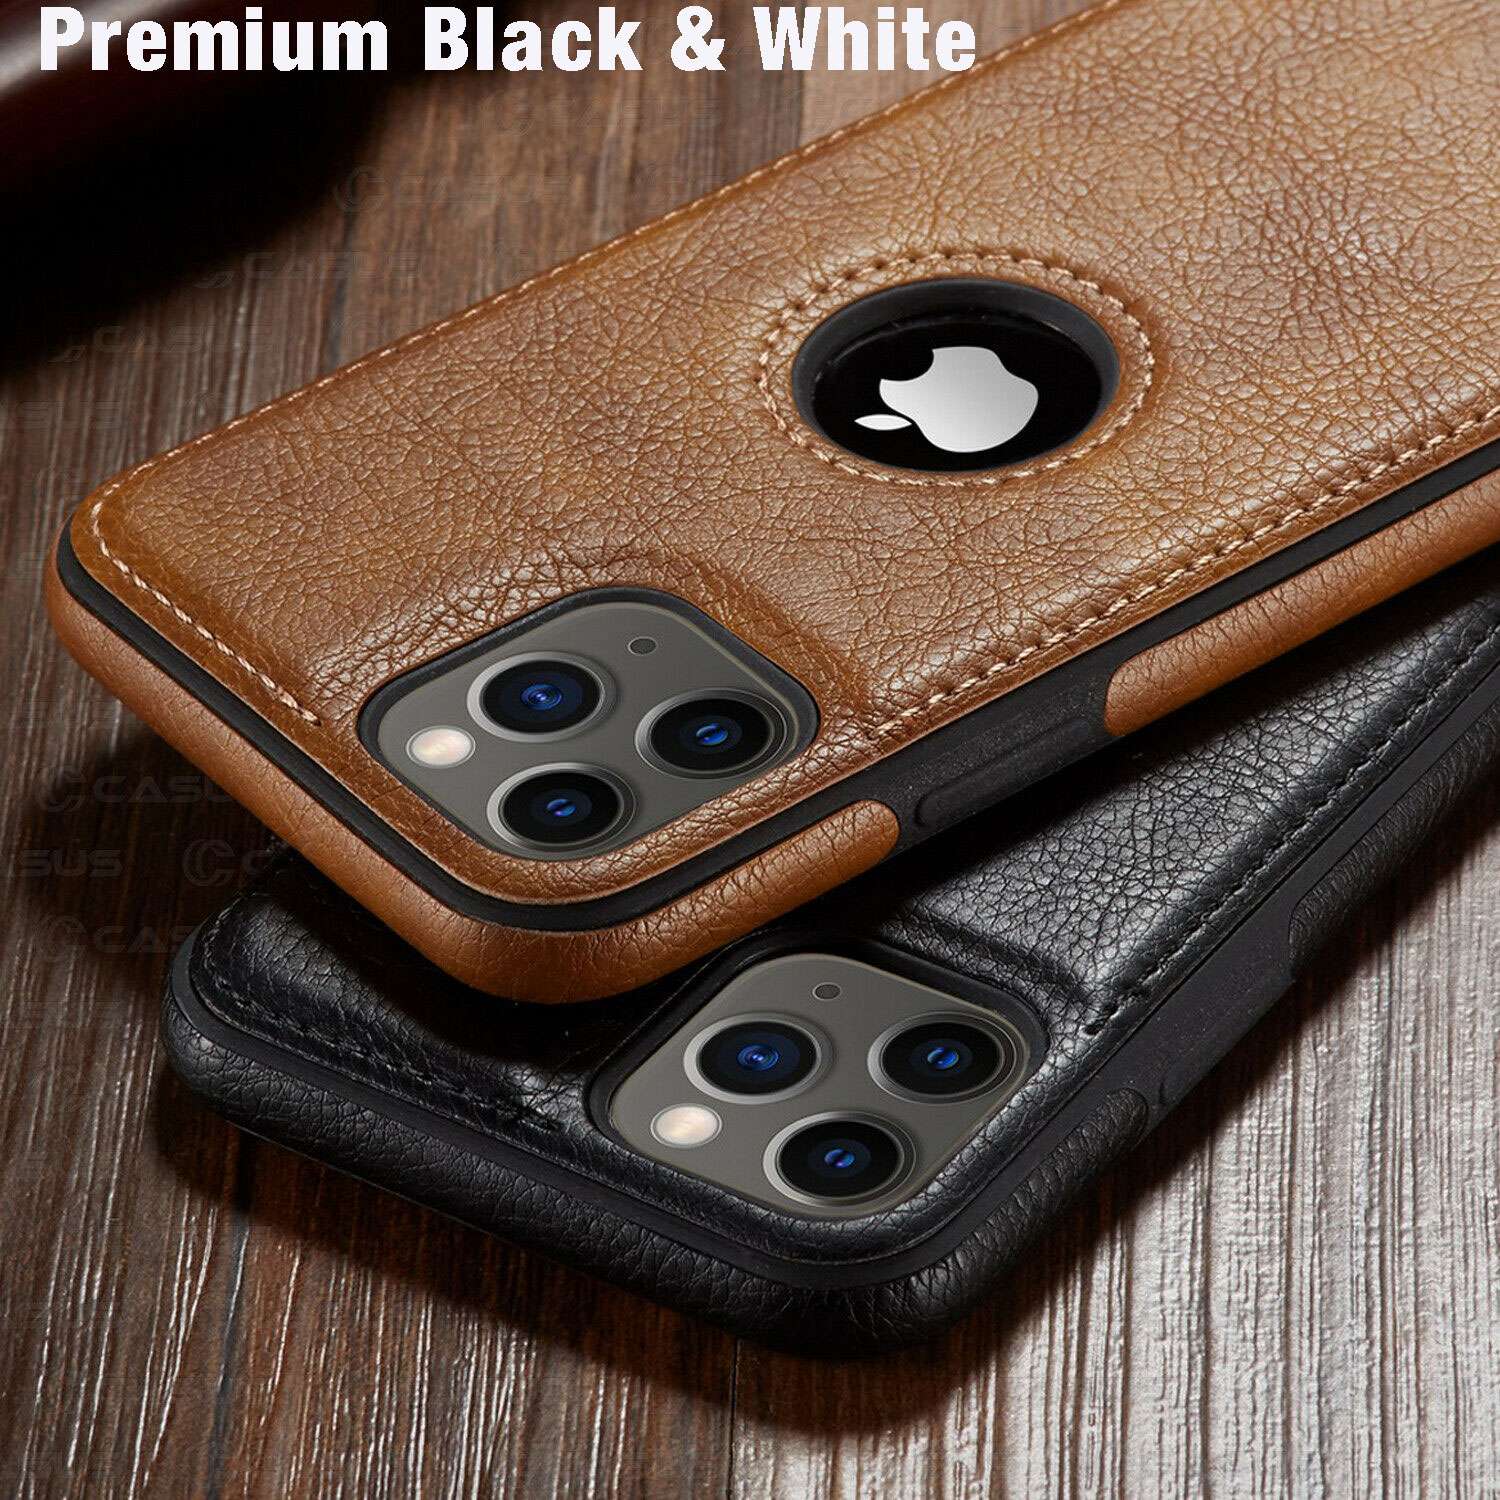 $26.65 Classic Flower LV Protective Leather Back Case For iPhone 11 - Black